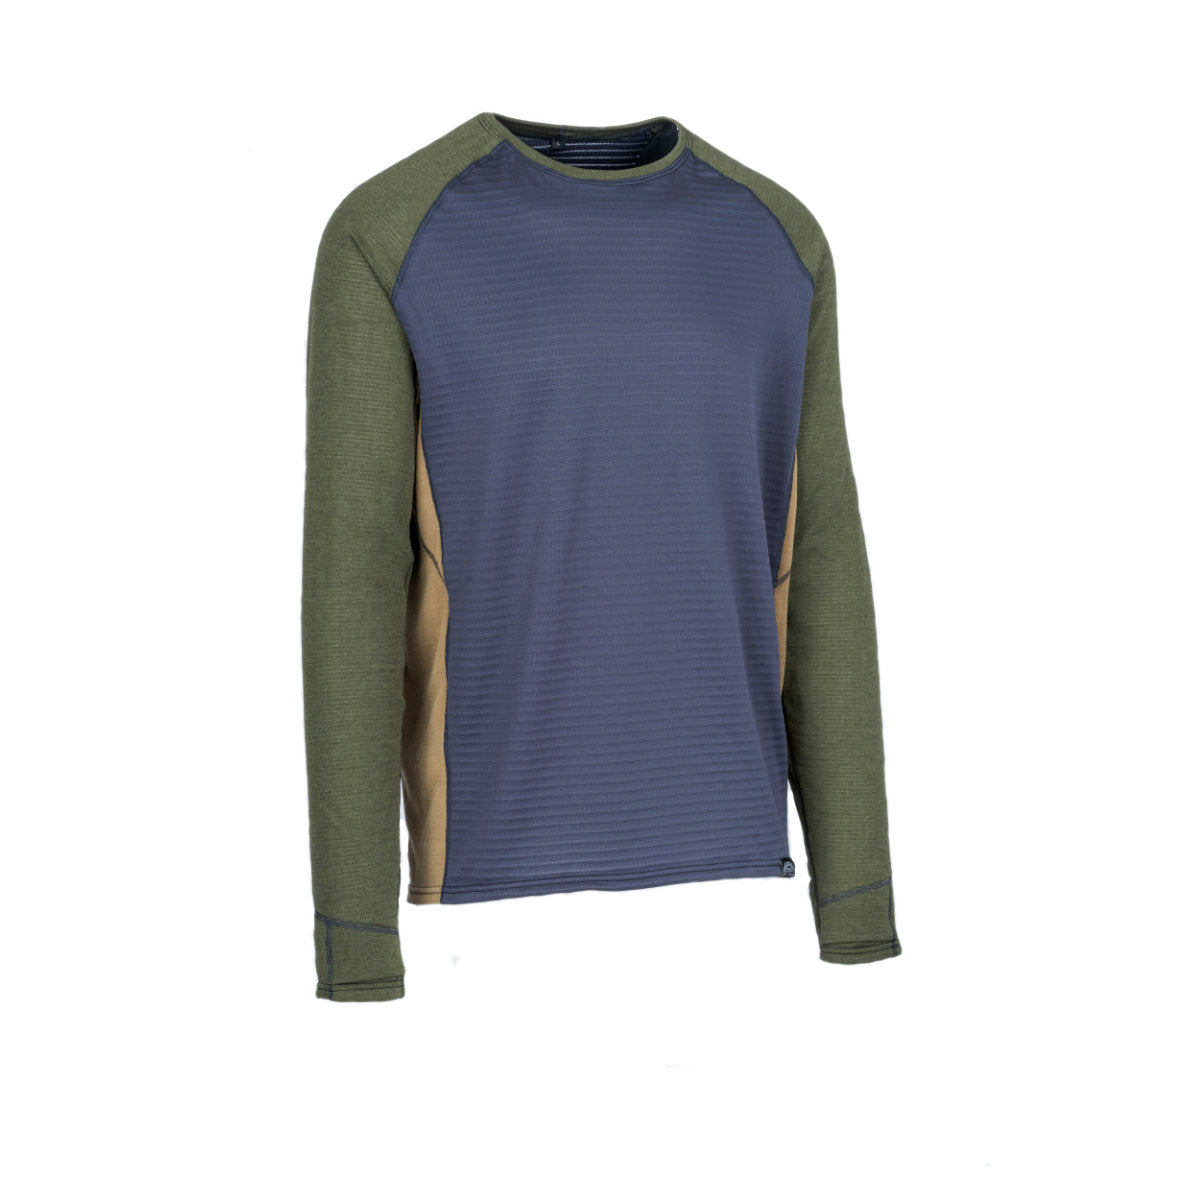 Polartec® Crewneck Research – Immersion Shirt Baseline Research | Immersion